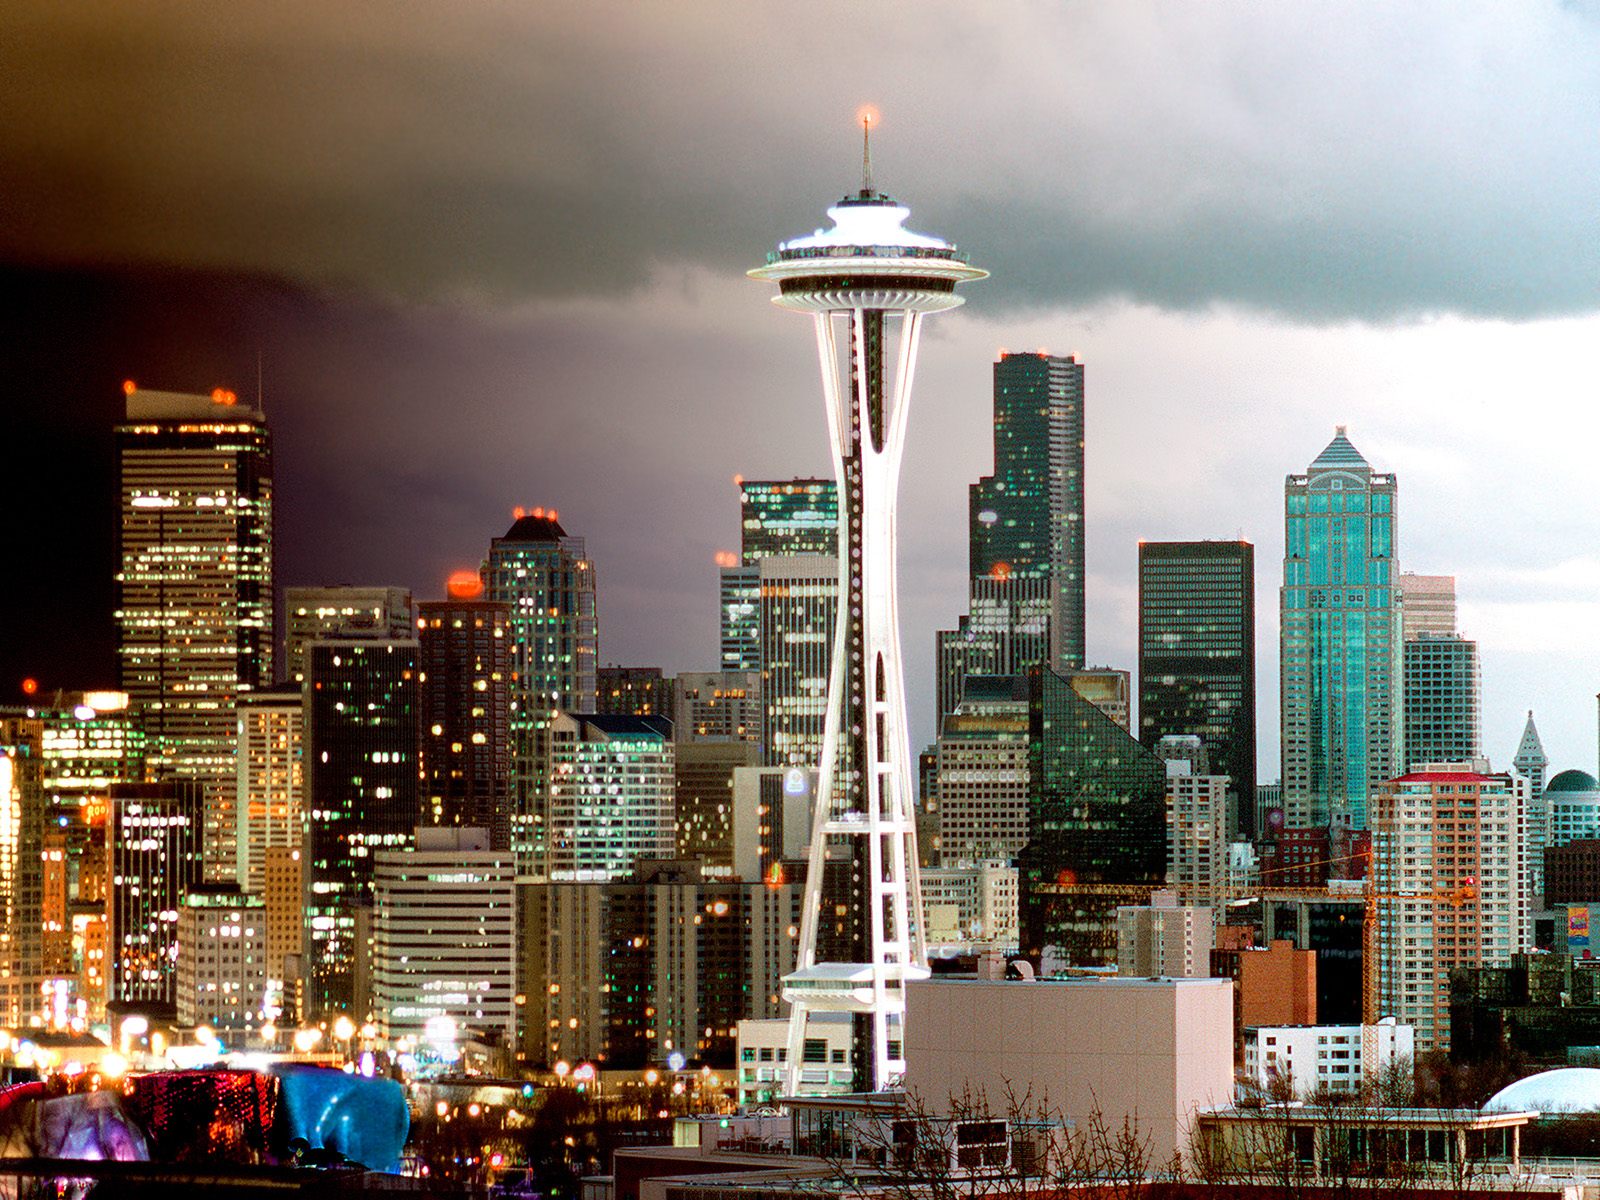 Download this Seattle wallpapers and place them on your desktop 1600x1200